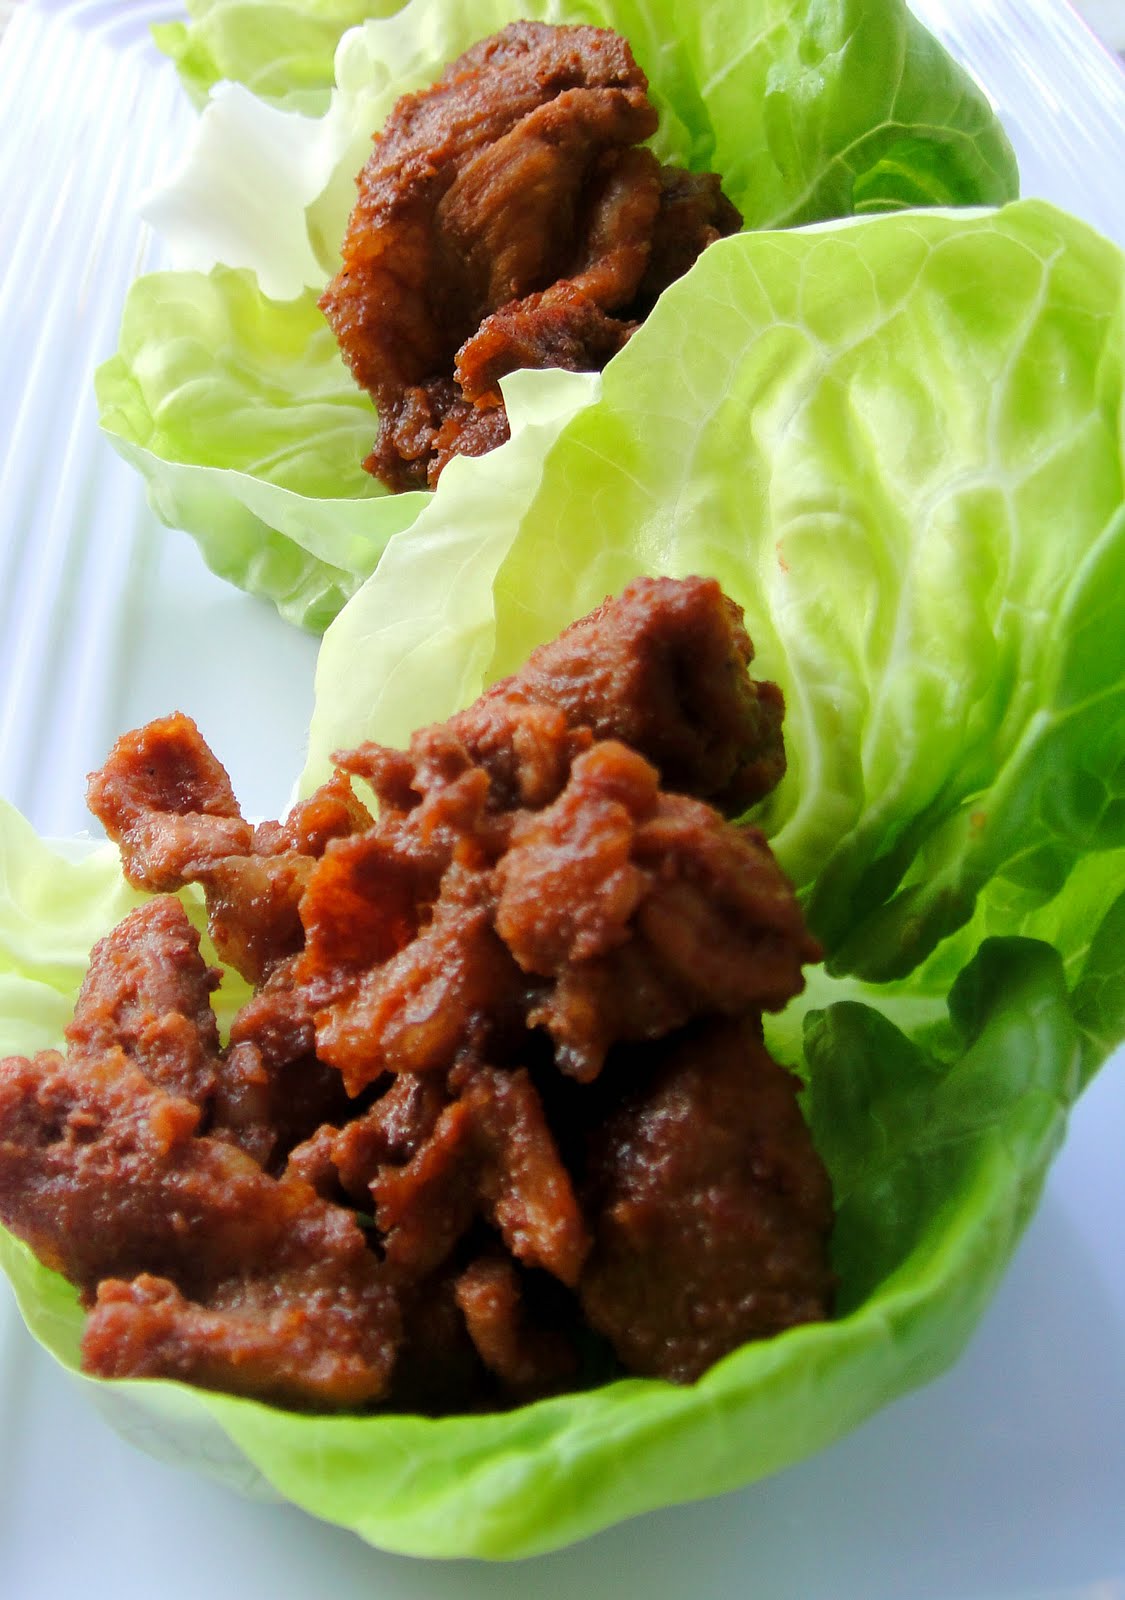 Healthy and Gourmet: Lettuce Wraps with Sriracha-Honey Beef